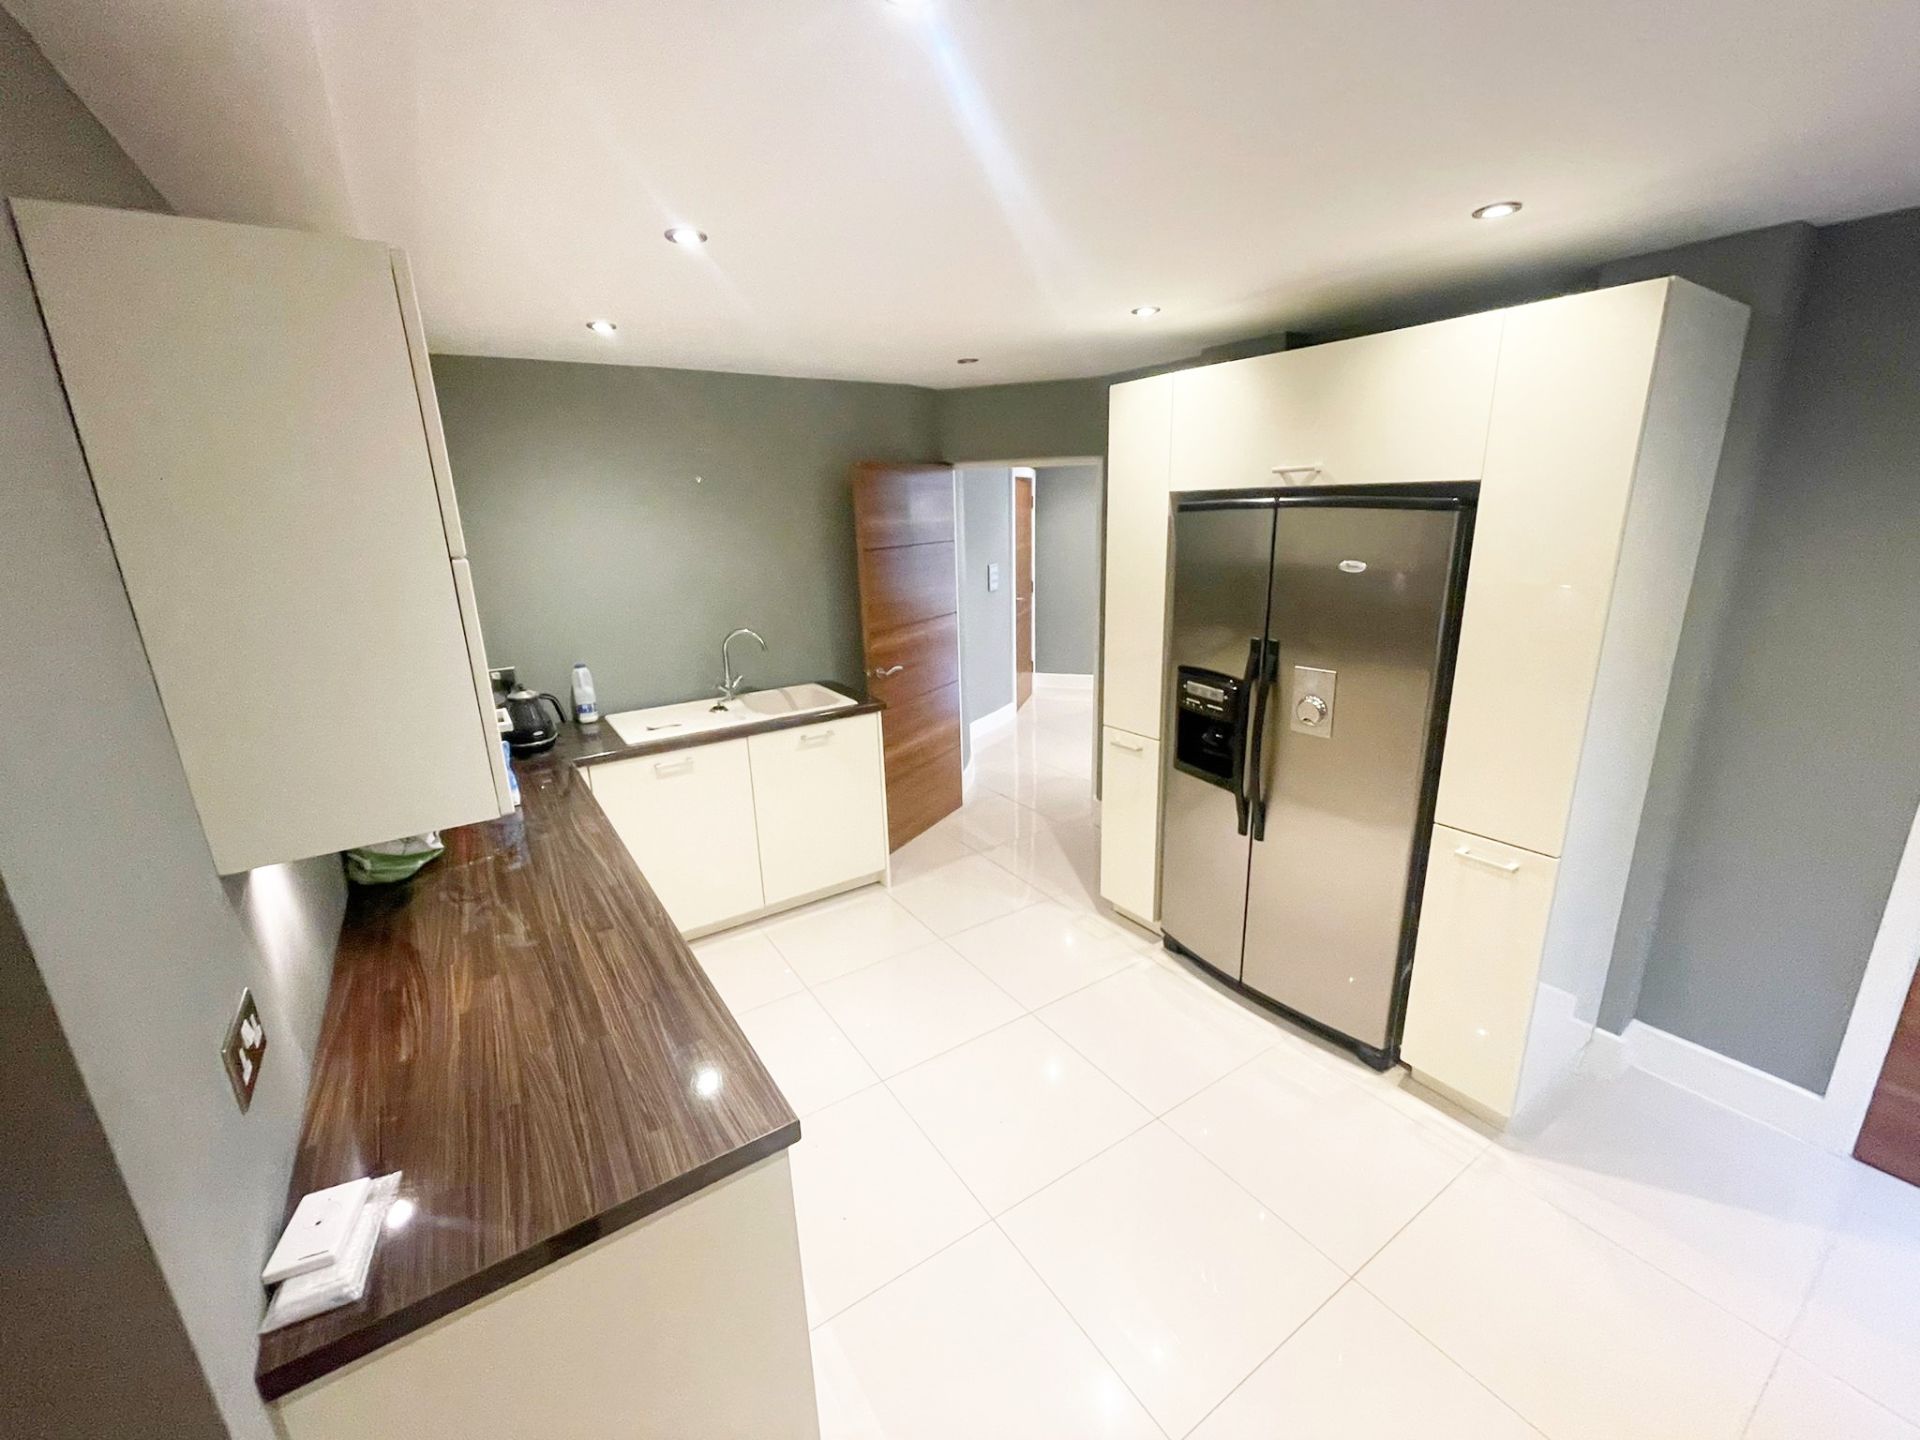 1 x Contemporary ALNO Fitted Kitchen With Branded  Appliances Created By Award Winning Kitchen - Image 35 of 89